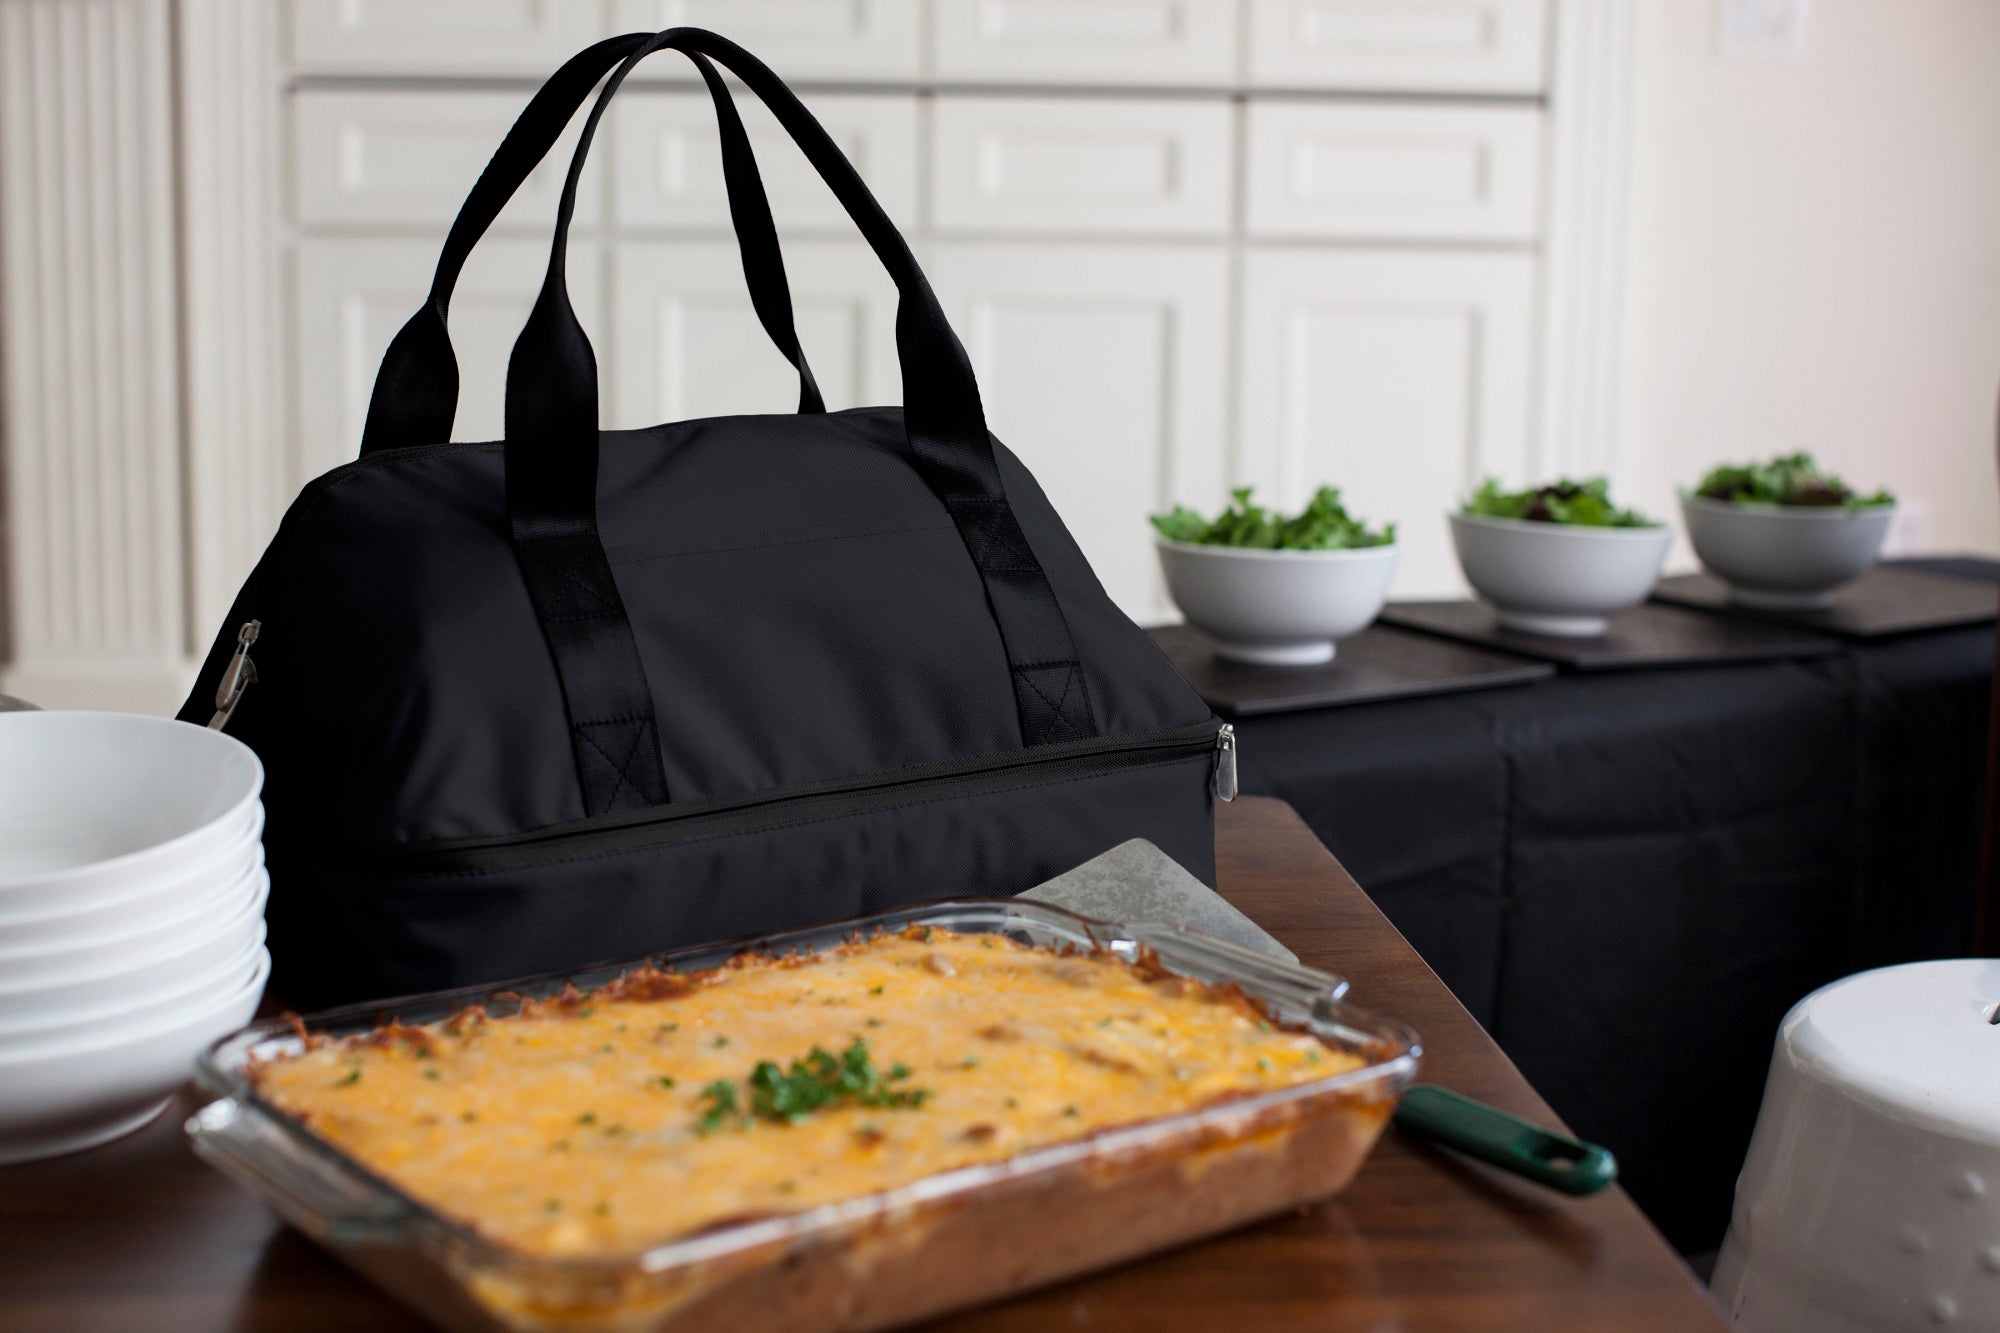 Pittsburgh Steelers - Potluck Casserole Tote